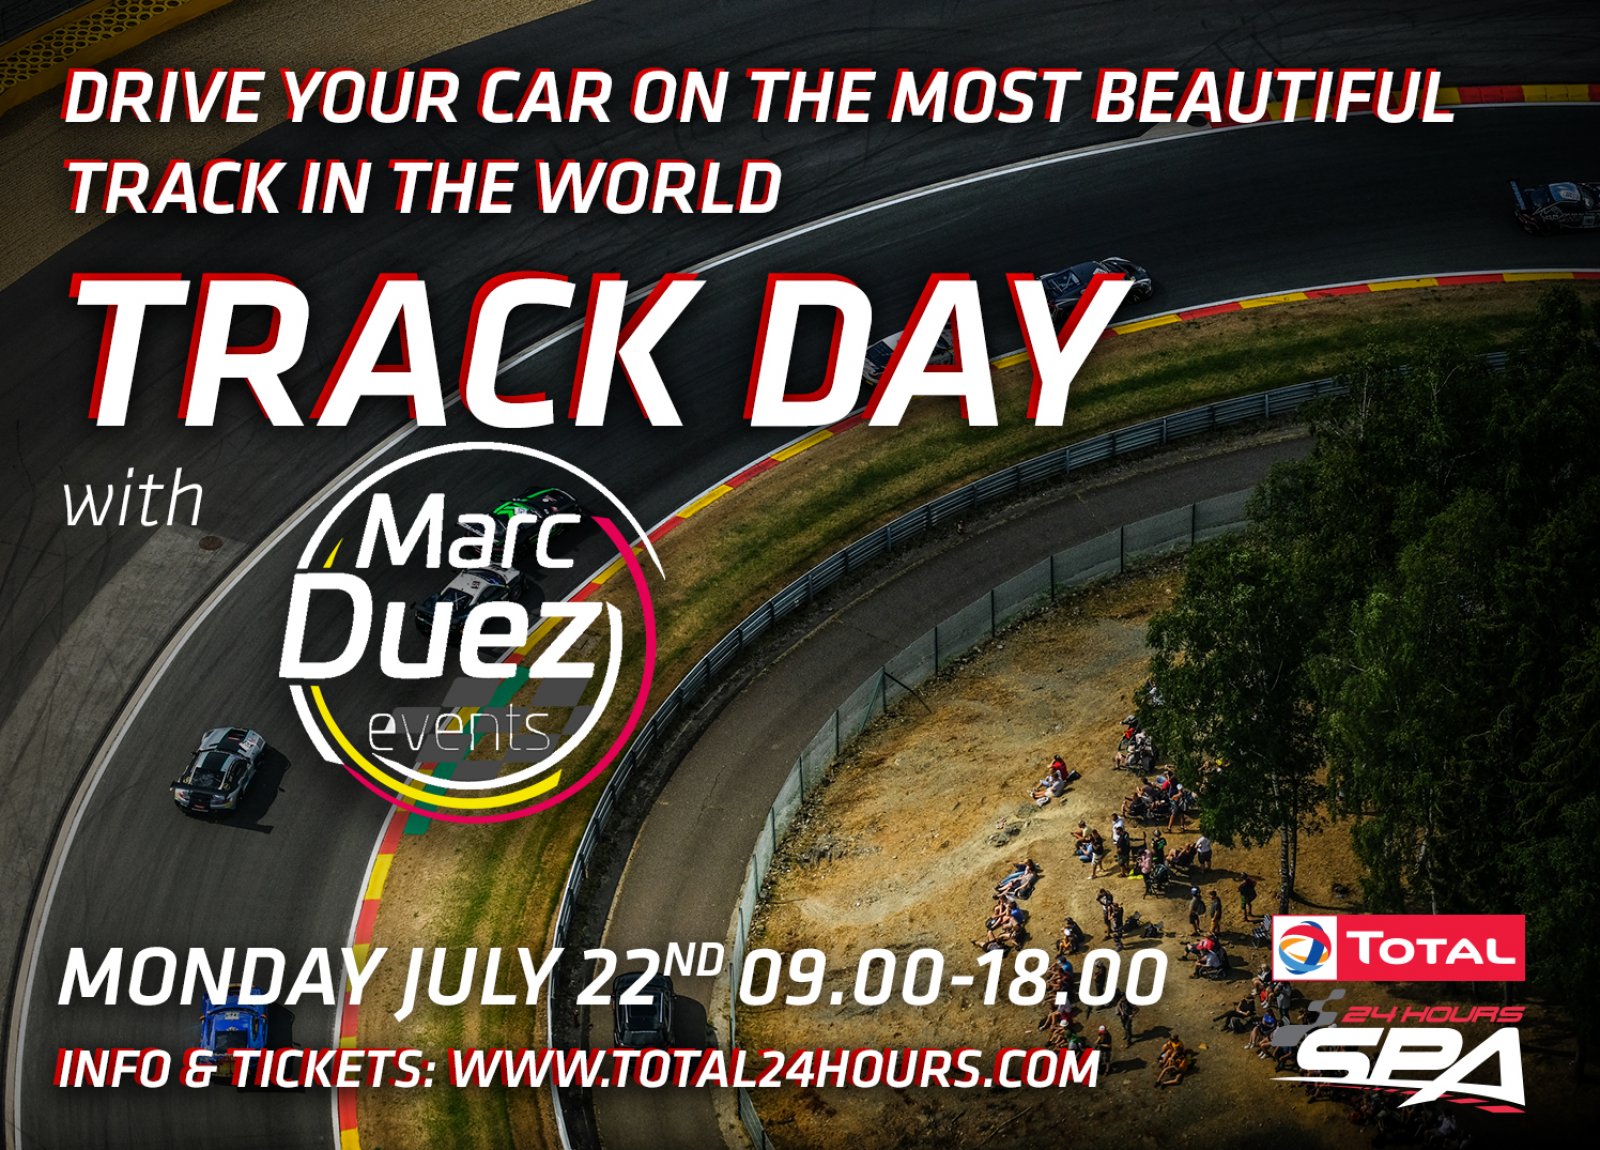 Total 24 Hours of Spa Track Day with Marc Duez: "A chance to share my passion"